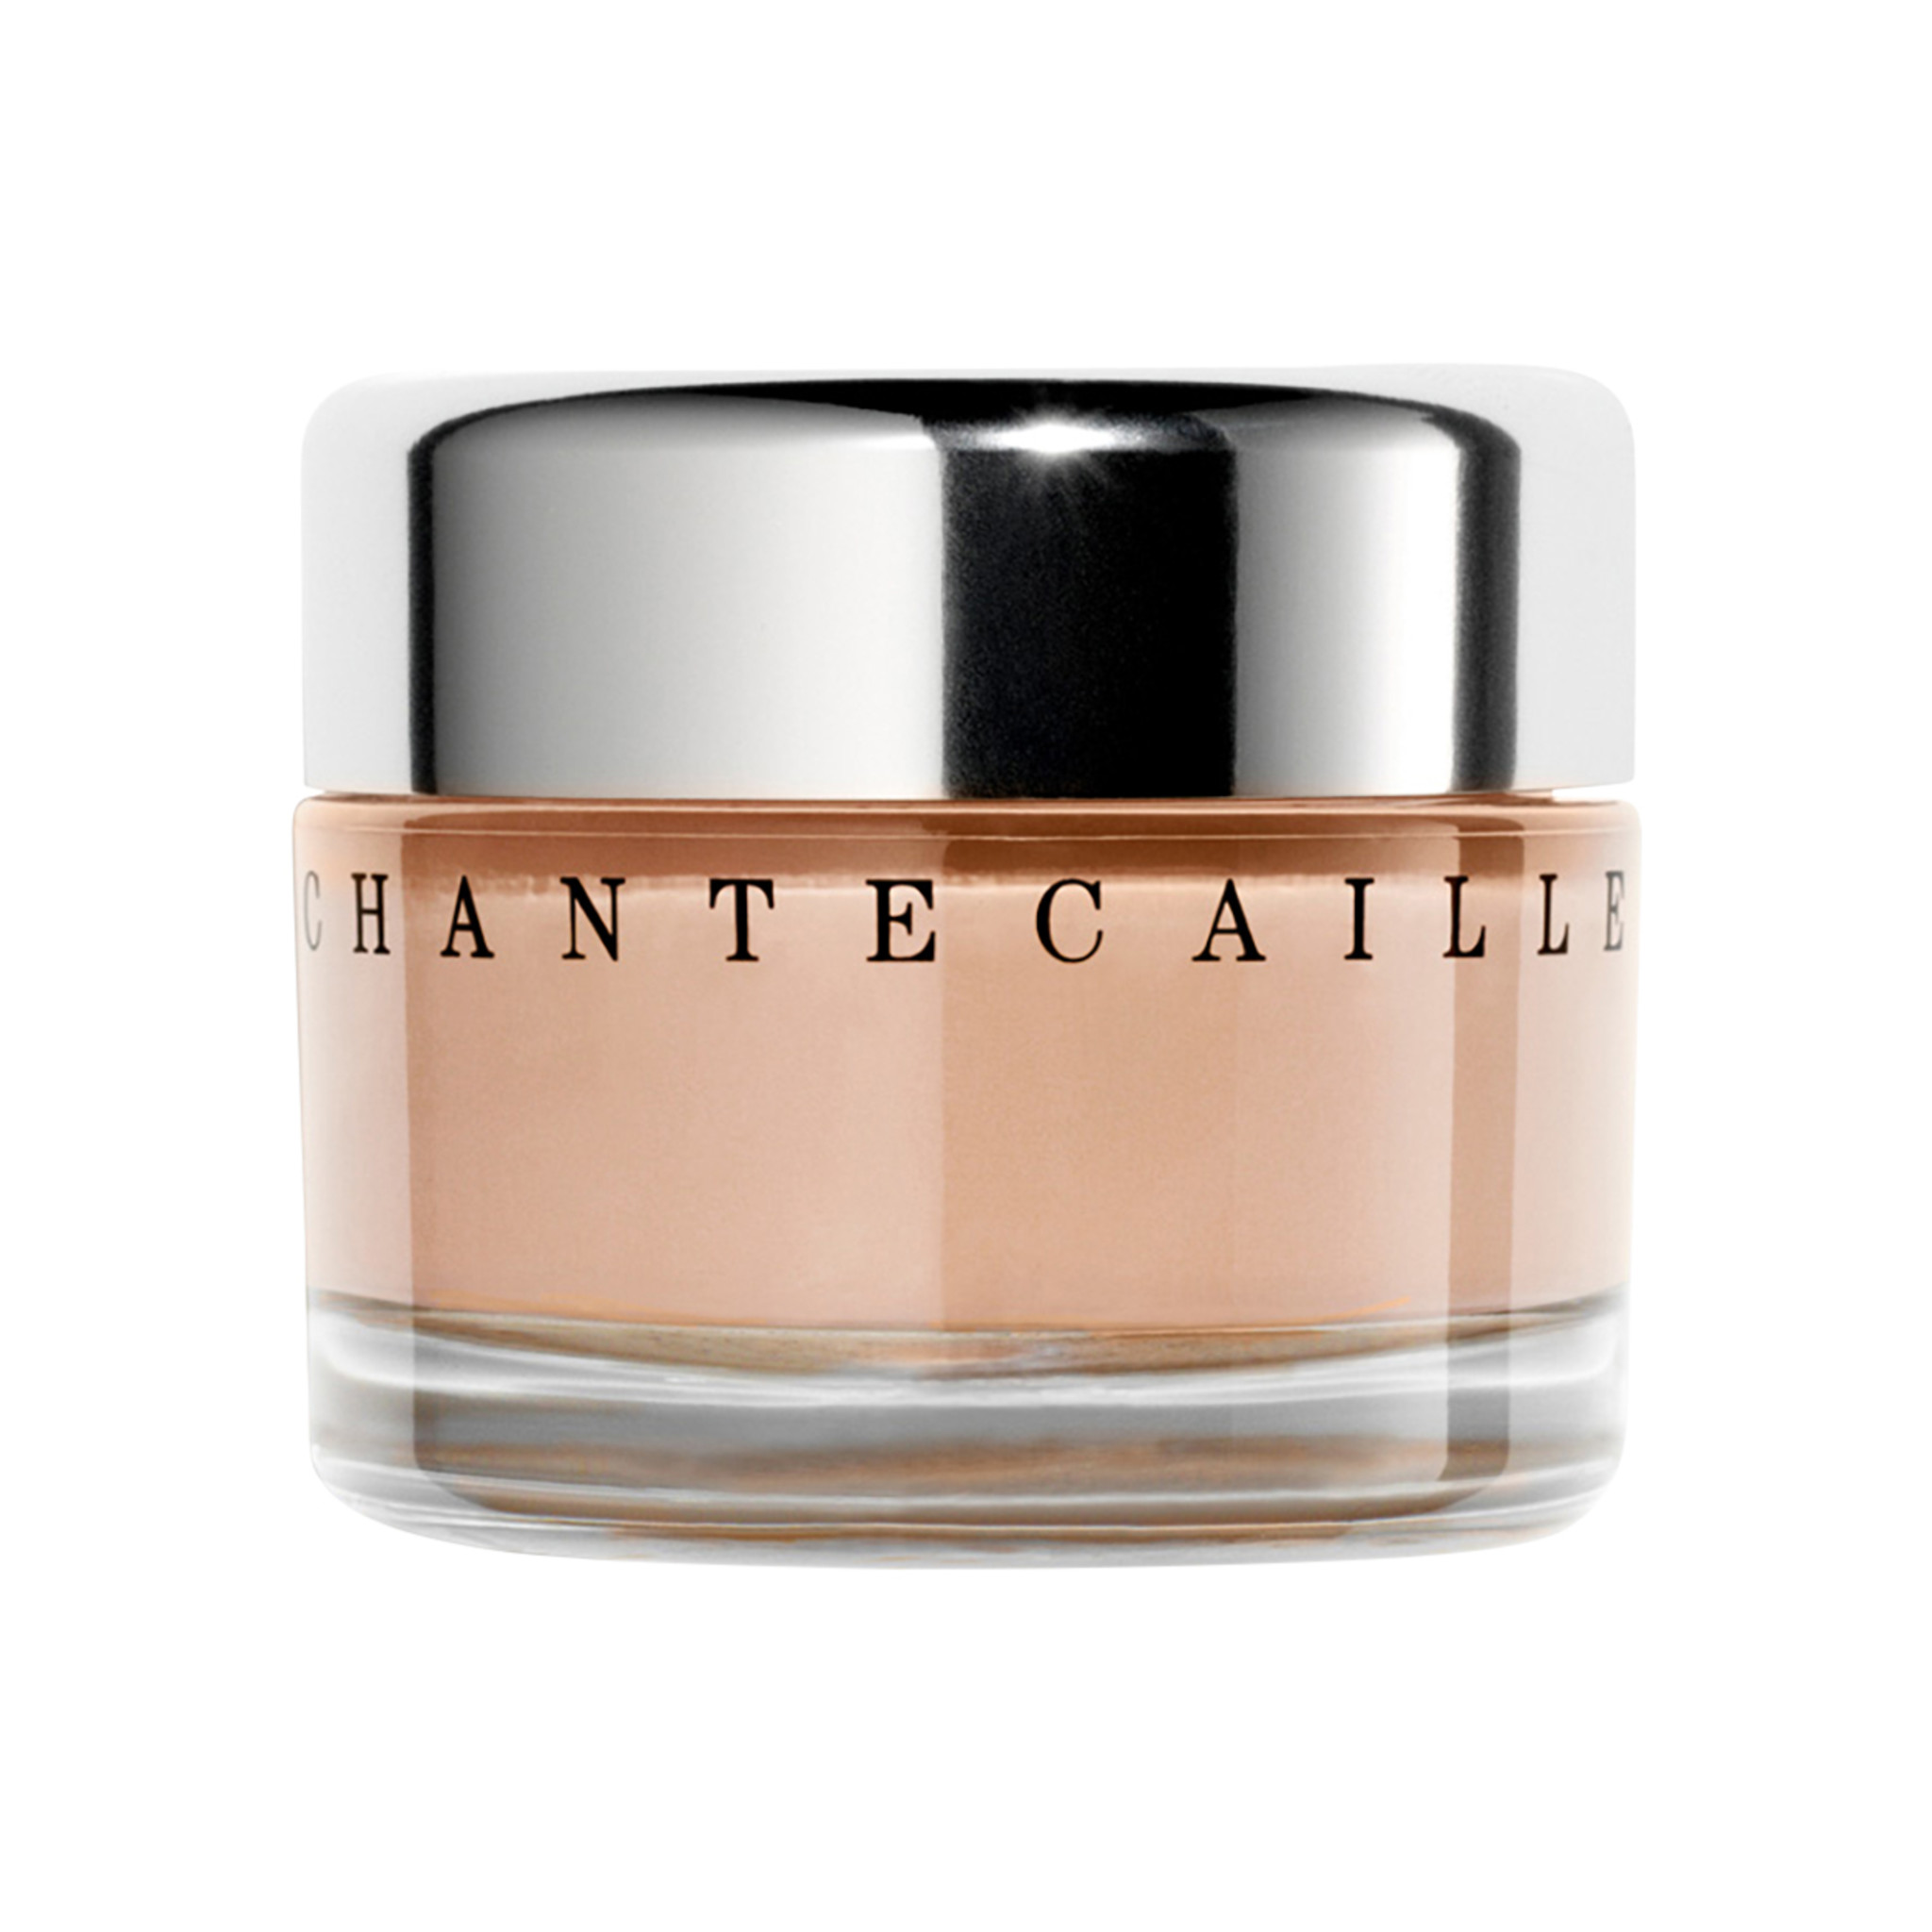 Glass jar of Chantecaille Future Skin Foundation with silver top